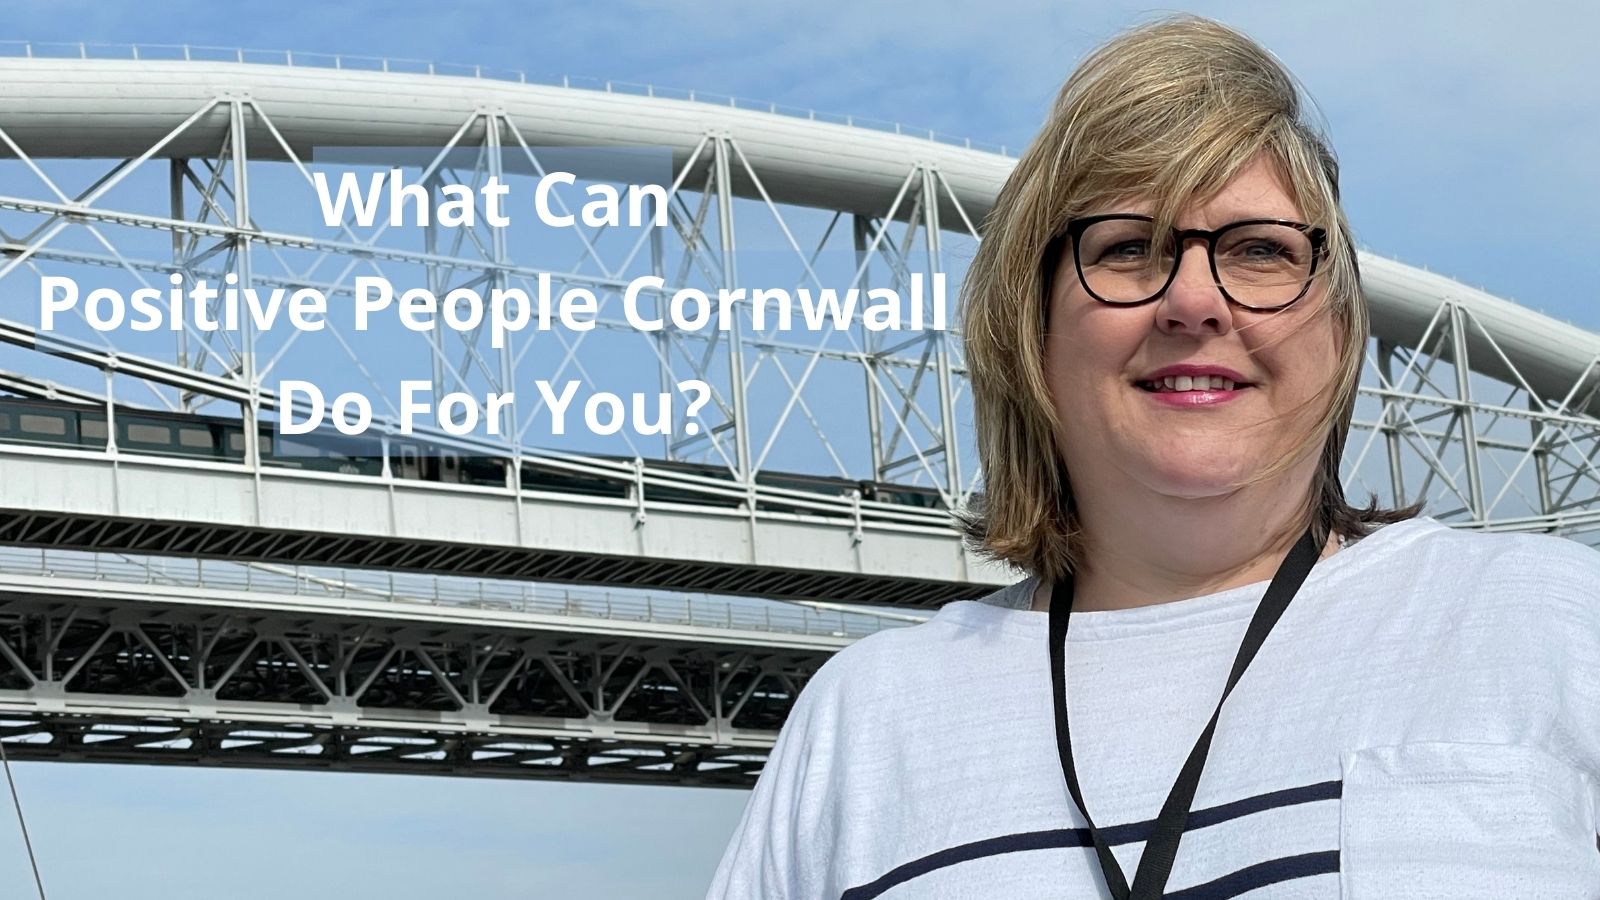 Positive People Cornwall's Community Coach, Mandy